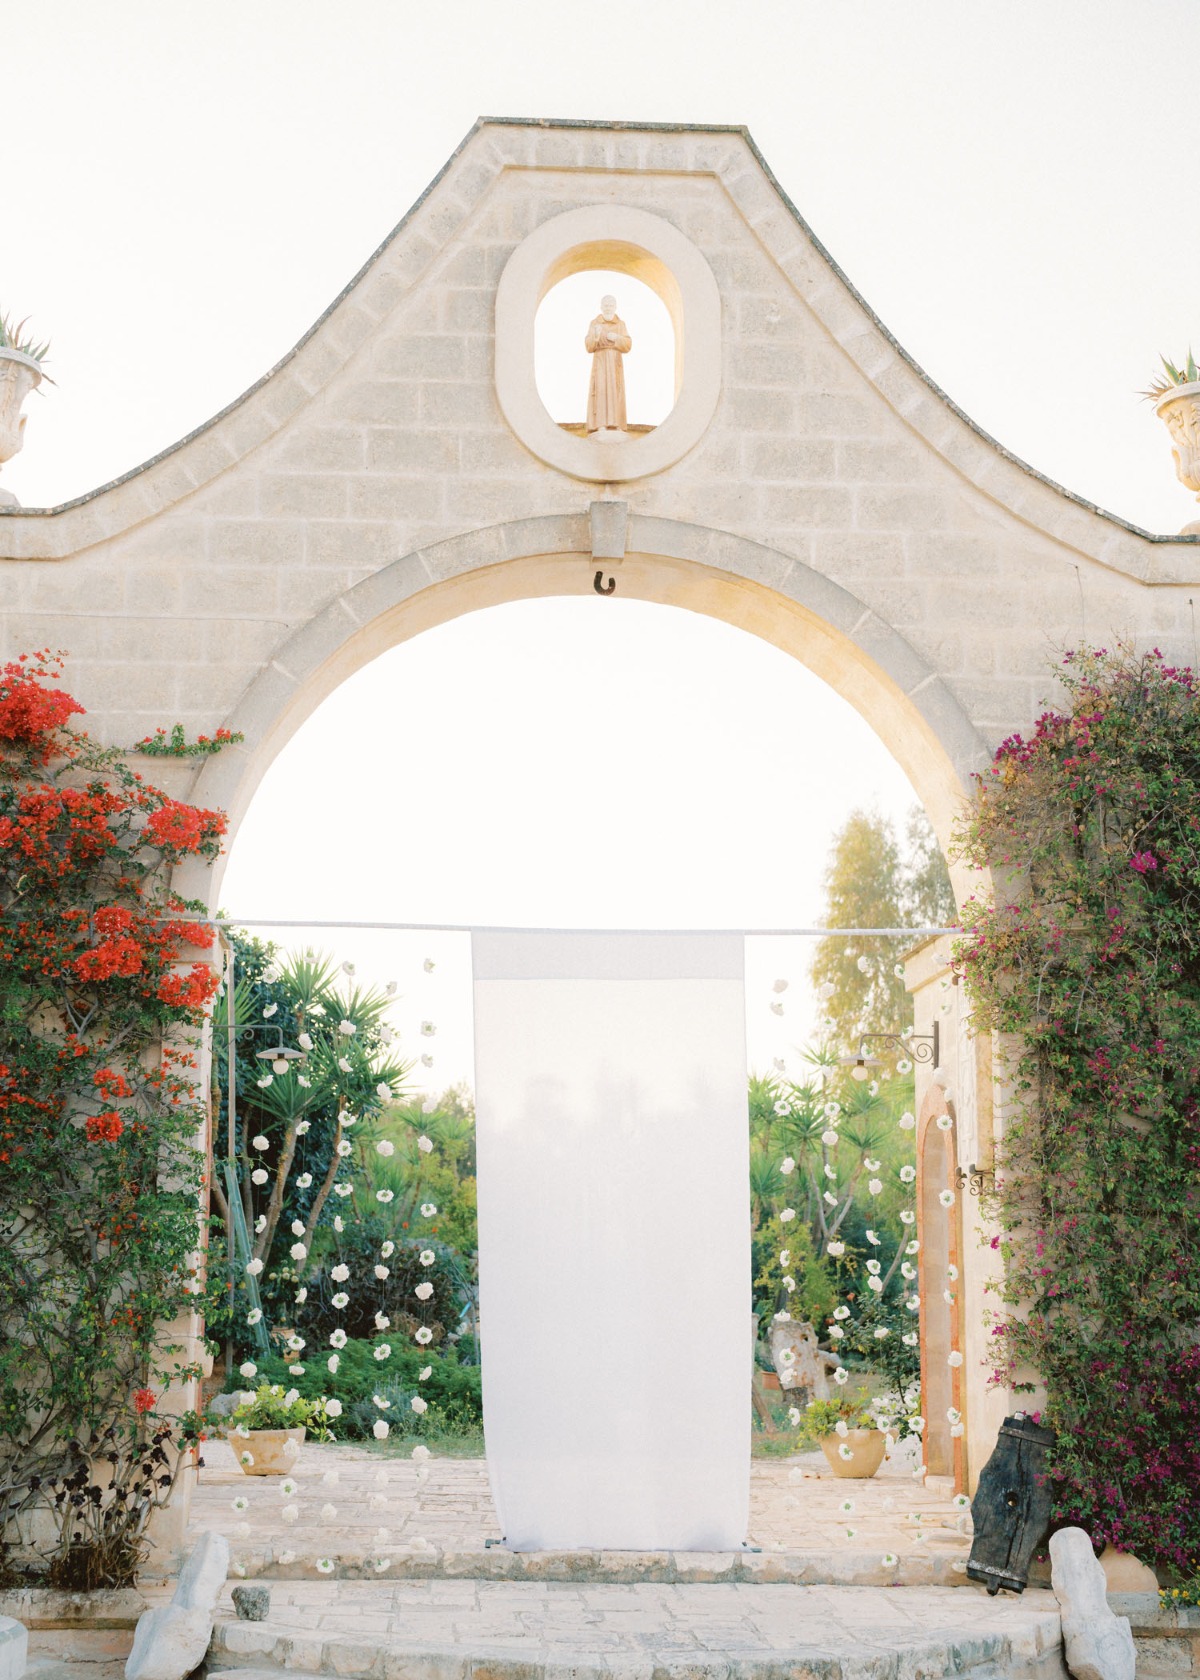 Endless ruffles and Apulian charm in this Italian celebration in purest white